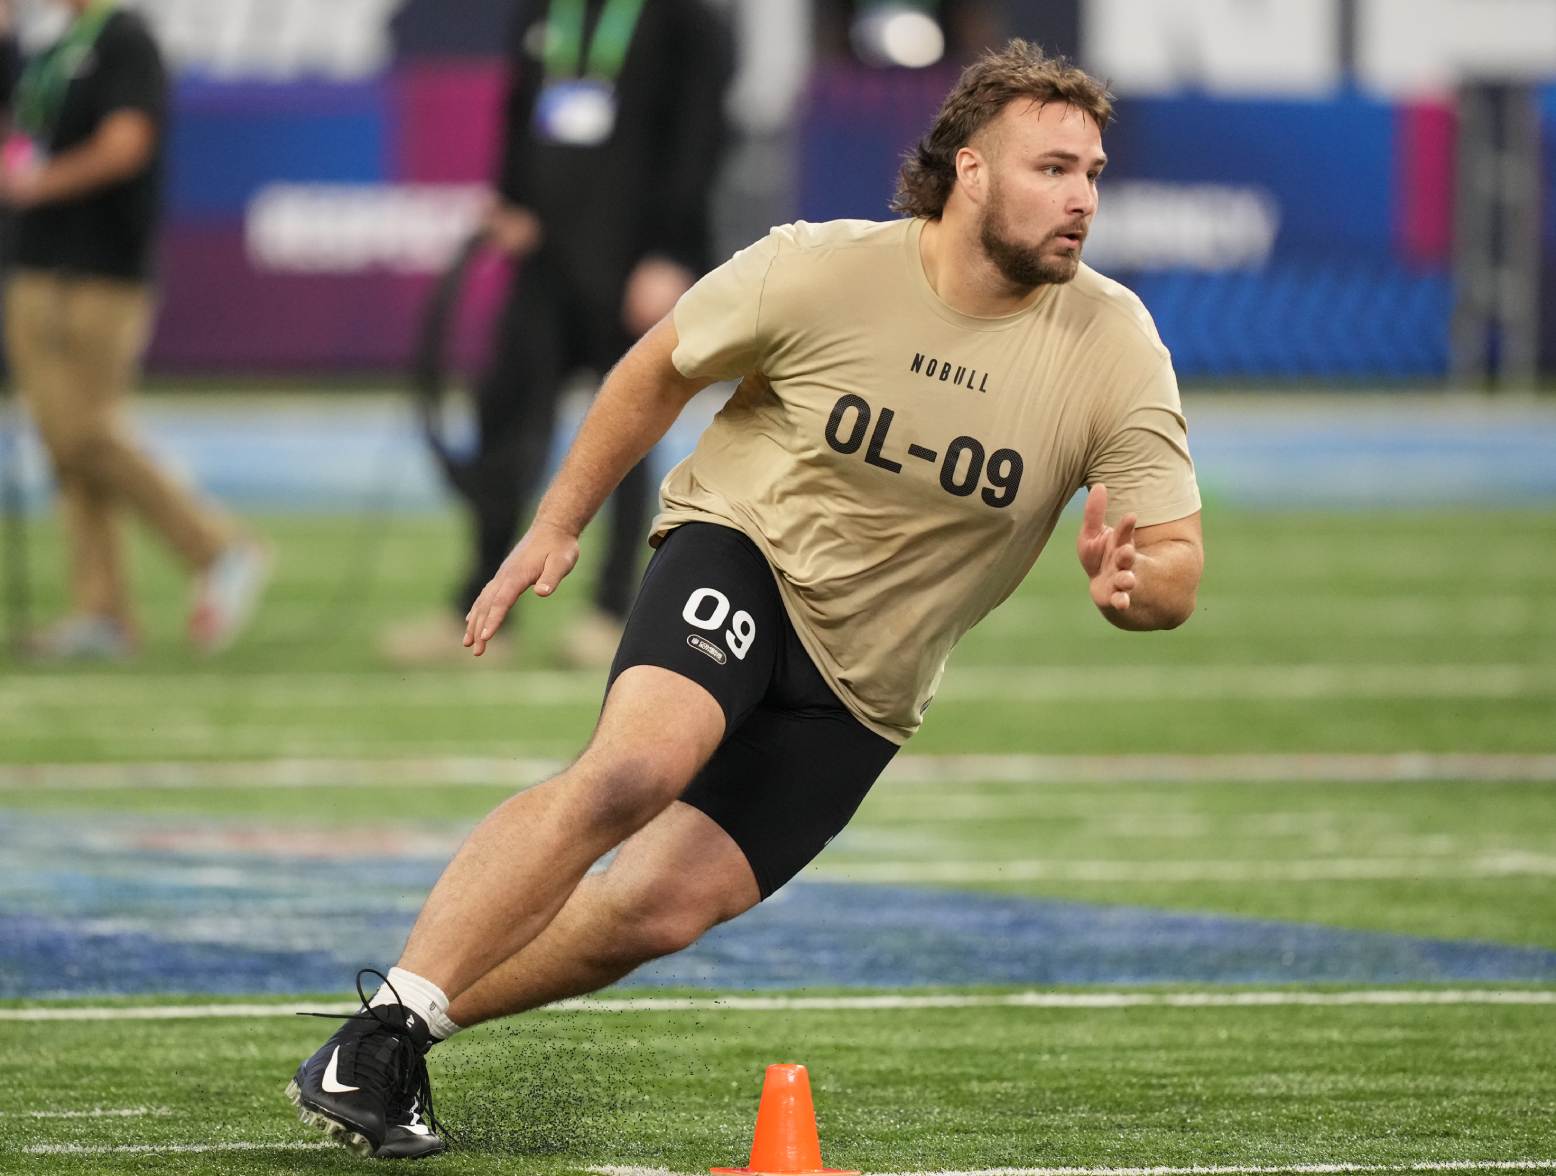 Mar 3, 2024; Indianapolis, IN, USA; Wisconsin offensive lineman Tanor Bortolini (OL09) during the 2024 NFL Combine at Lucas Oil Stadium. Credit: Kirby Lee-USA TODAY Sports